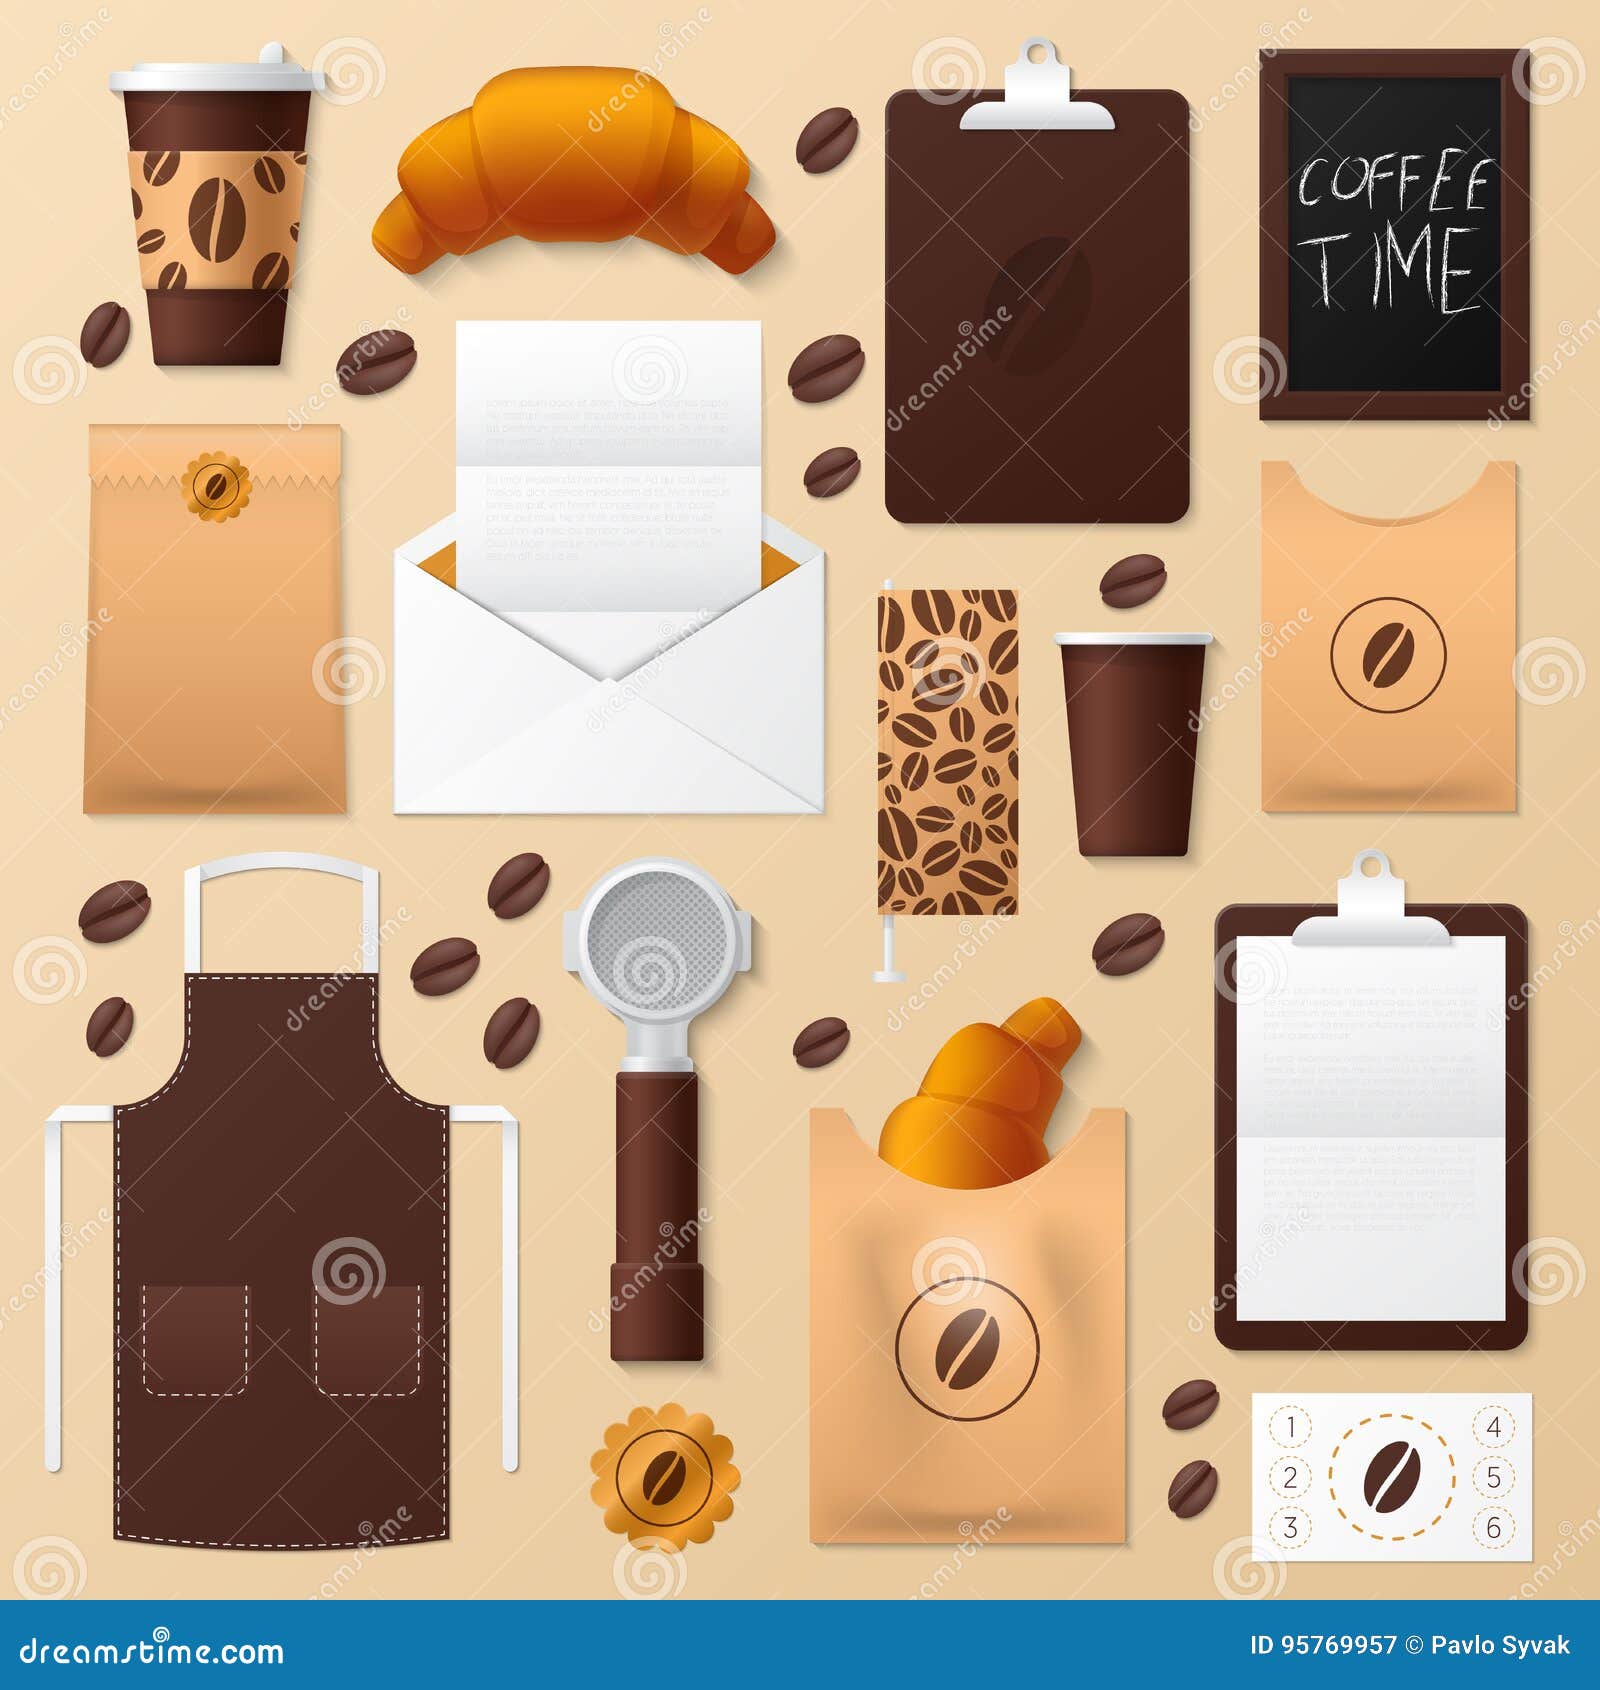 Download Coffee Shop Corporate Identity Template Set. Cafe Stationary Mockup. Personal Branding Stock ...